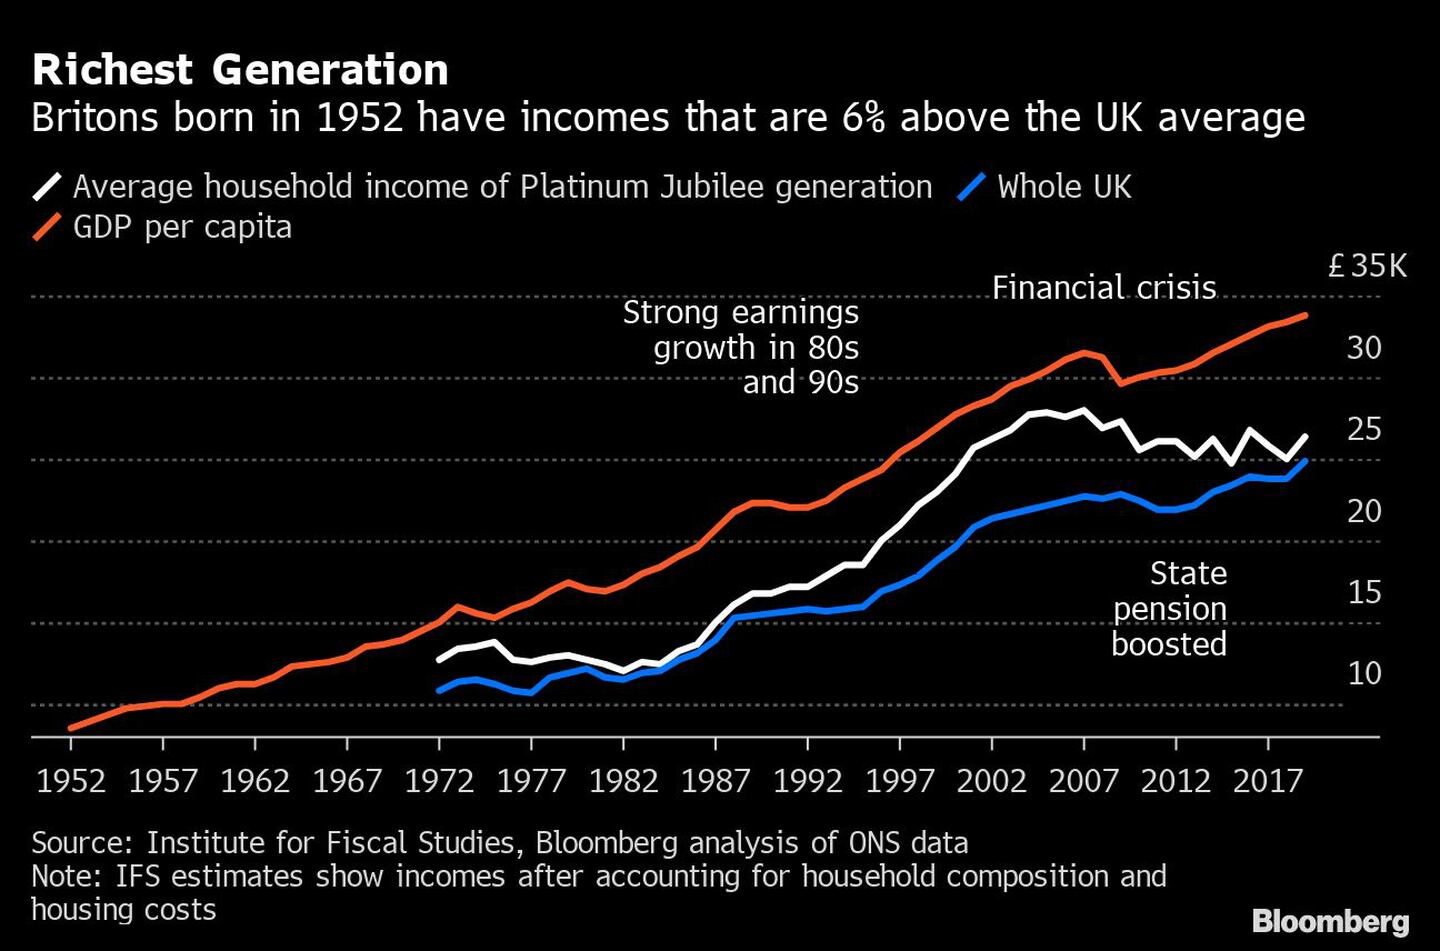 Richest Generation  | Britons born in 1952 have incomes that are 6% above the UK averagedfd